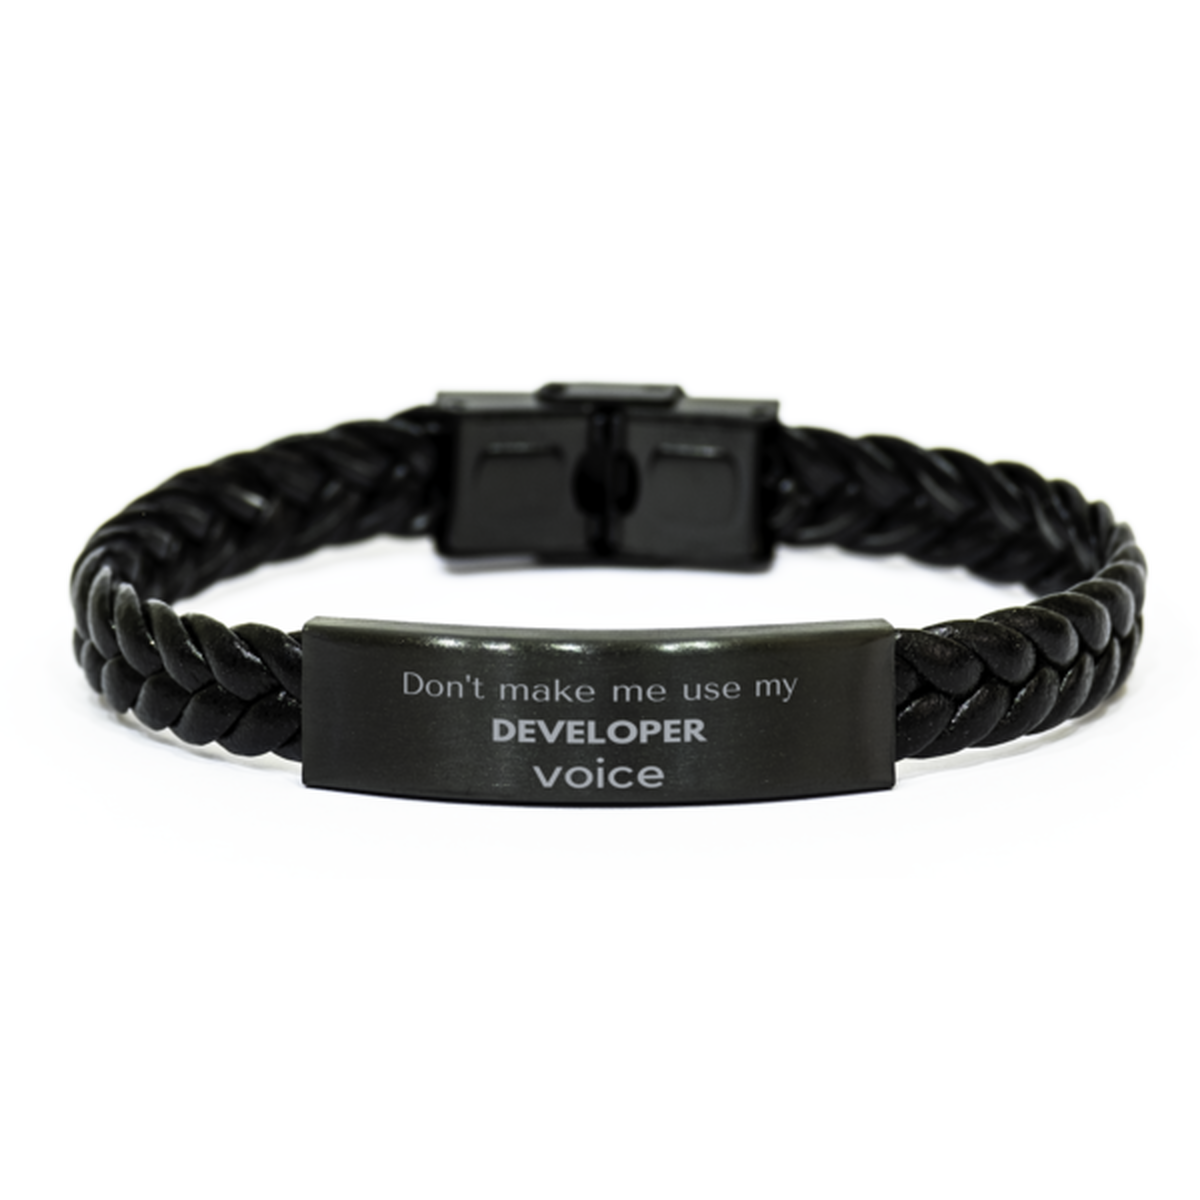 Don't make me use my Developer voice, Sarcasm Developer Gifts, Christmas Developer Braided Leather Bracelet Birthday Unique Gifts For Developer Coworkers, Men, Women, Colleague, Friends